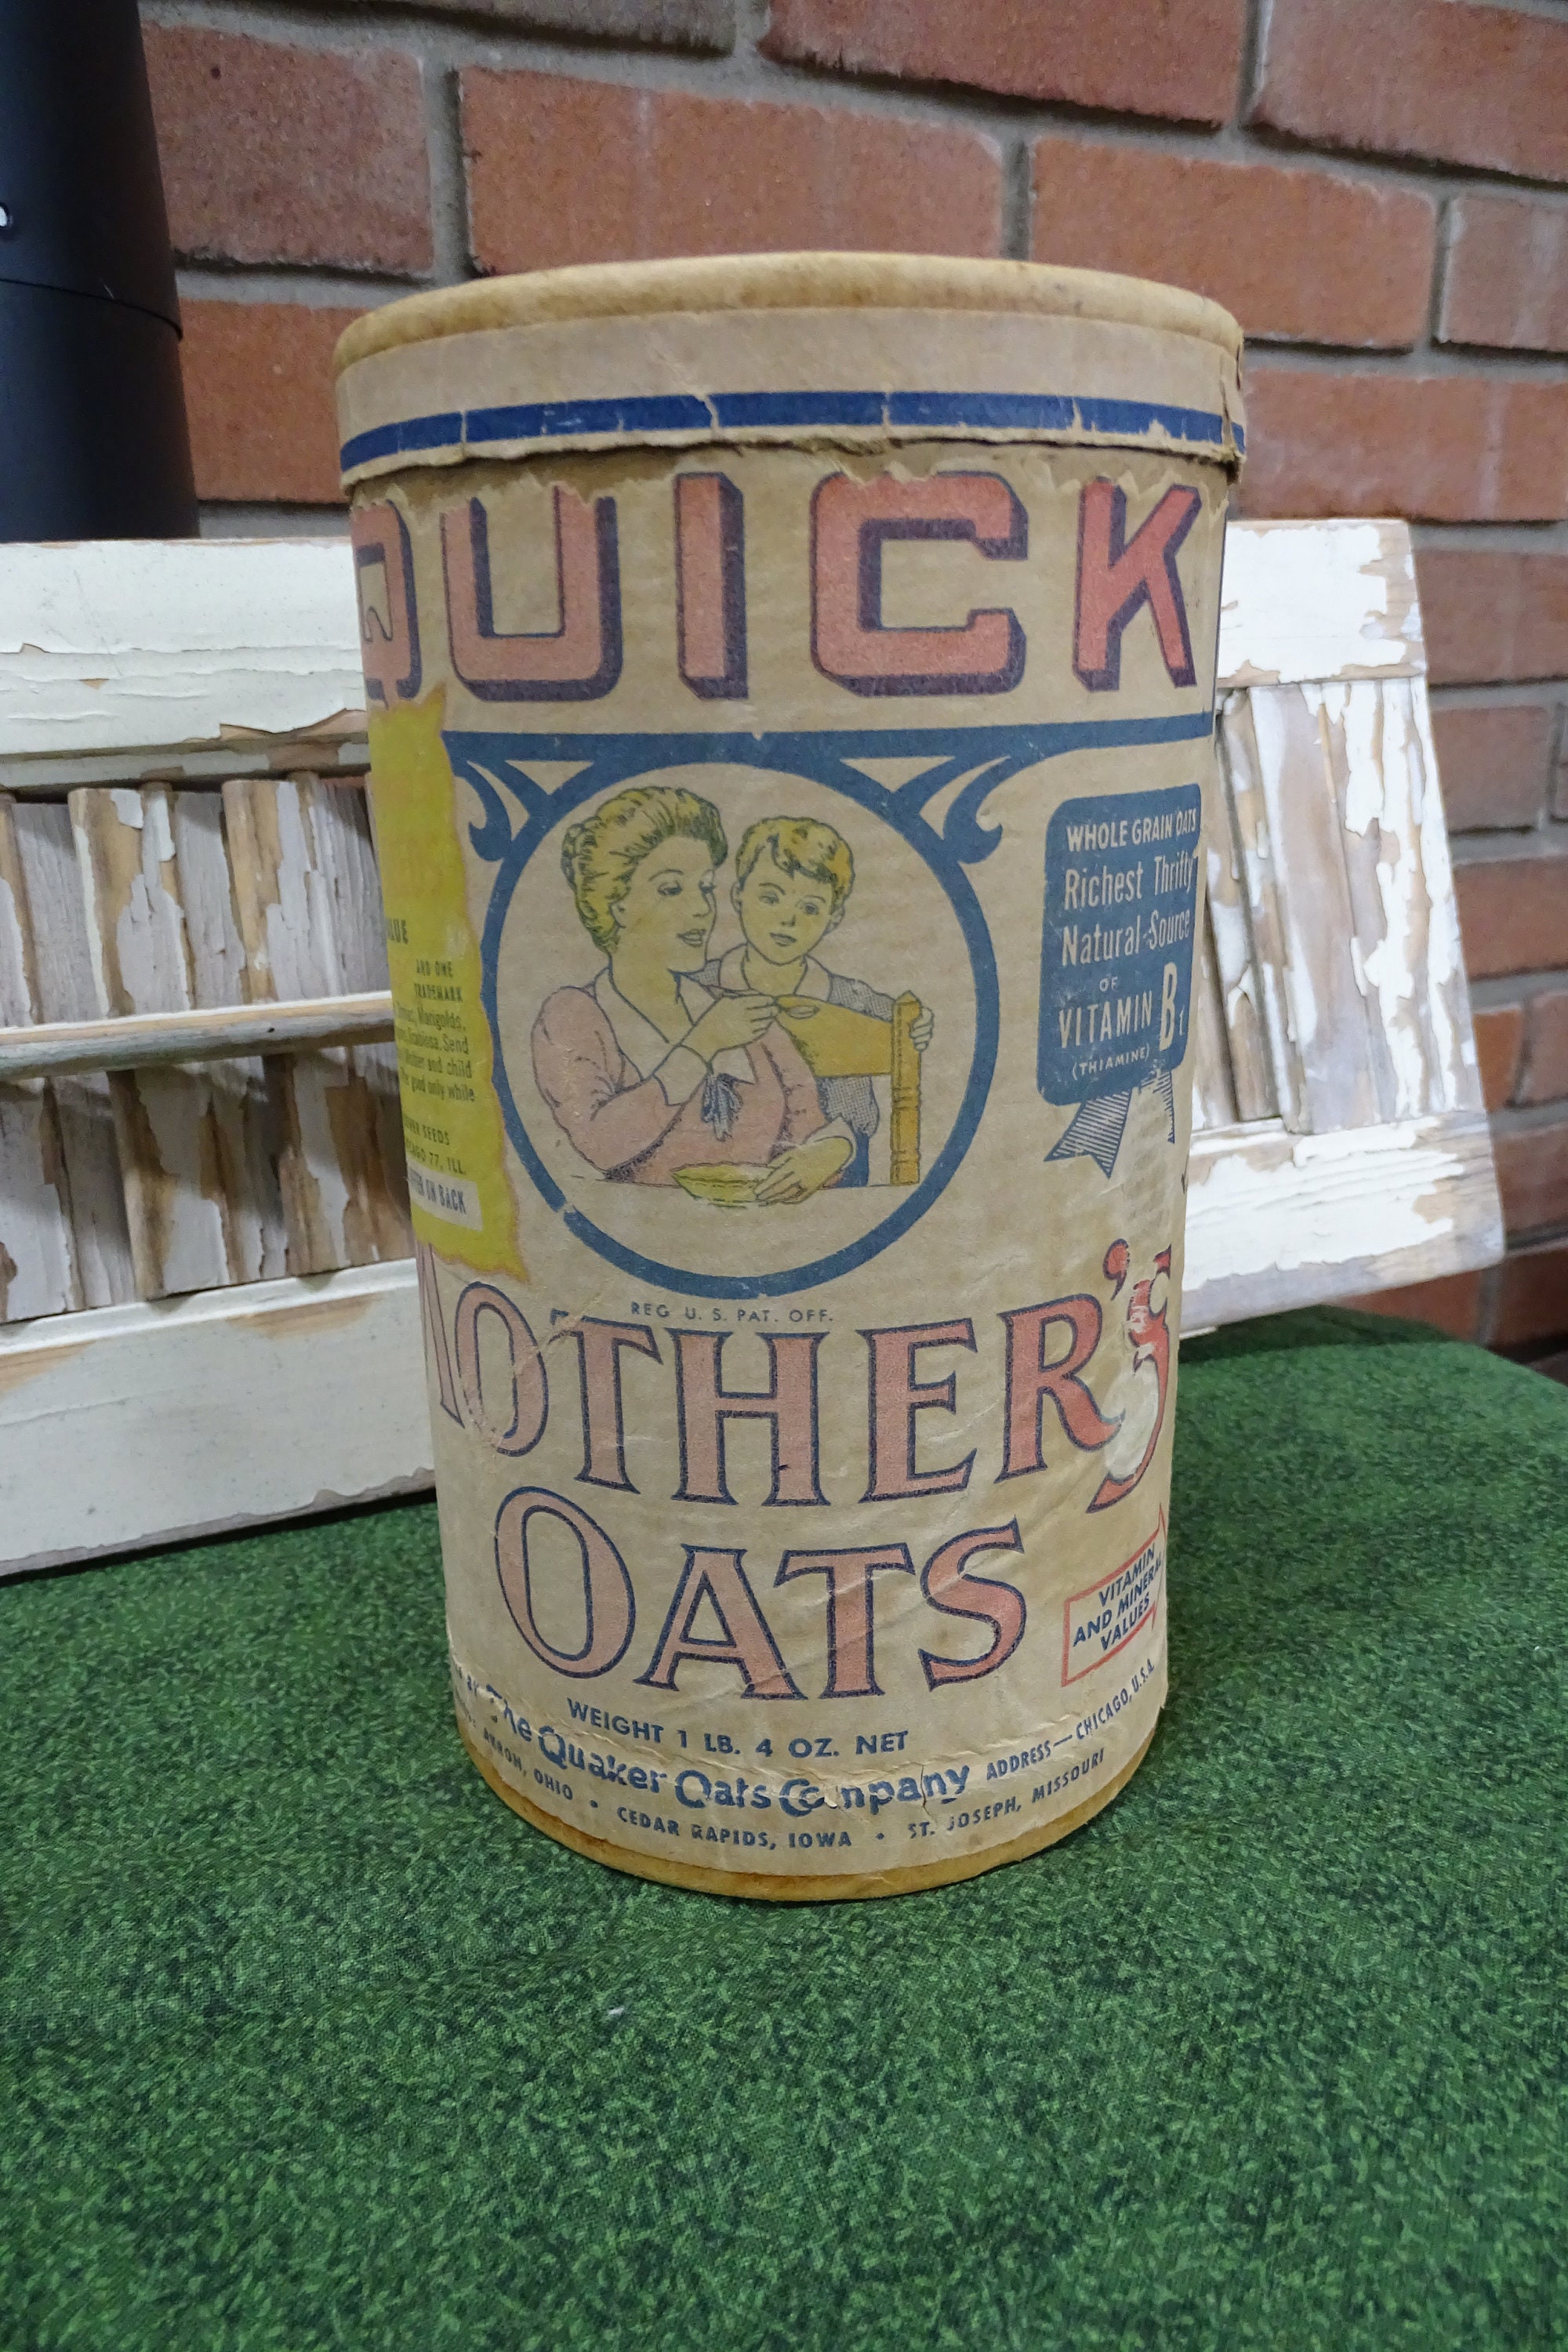 COLLECTION OF 3 QUAKER OATS CONTAINER - BOX VINTAGE & 1922 REPLICA LABEL